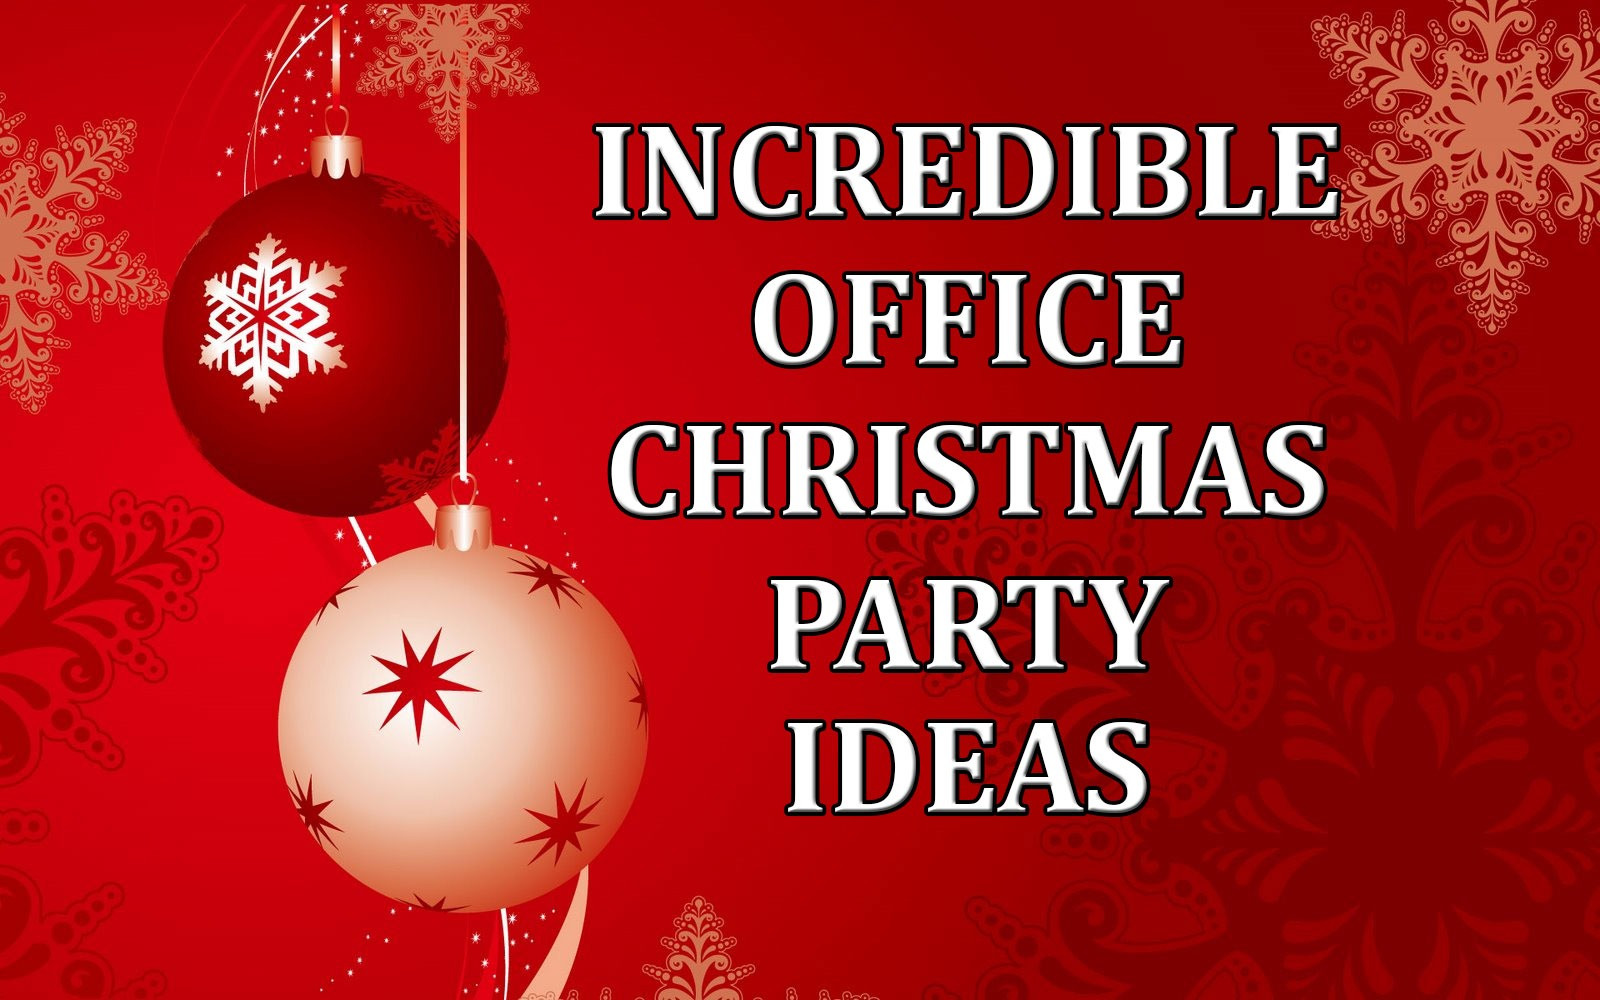 21 Of the Best Ideas for Holiday Party Ideas for Work - Home, Family